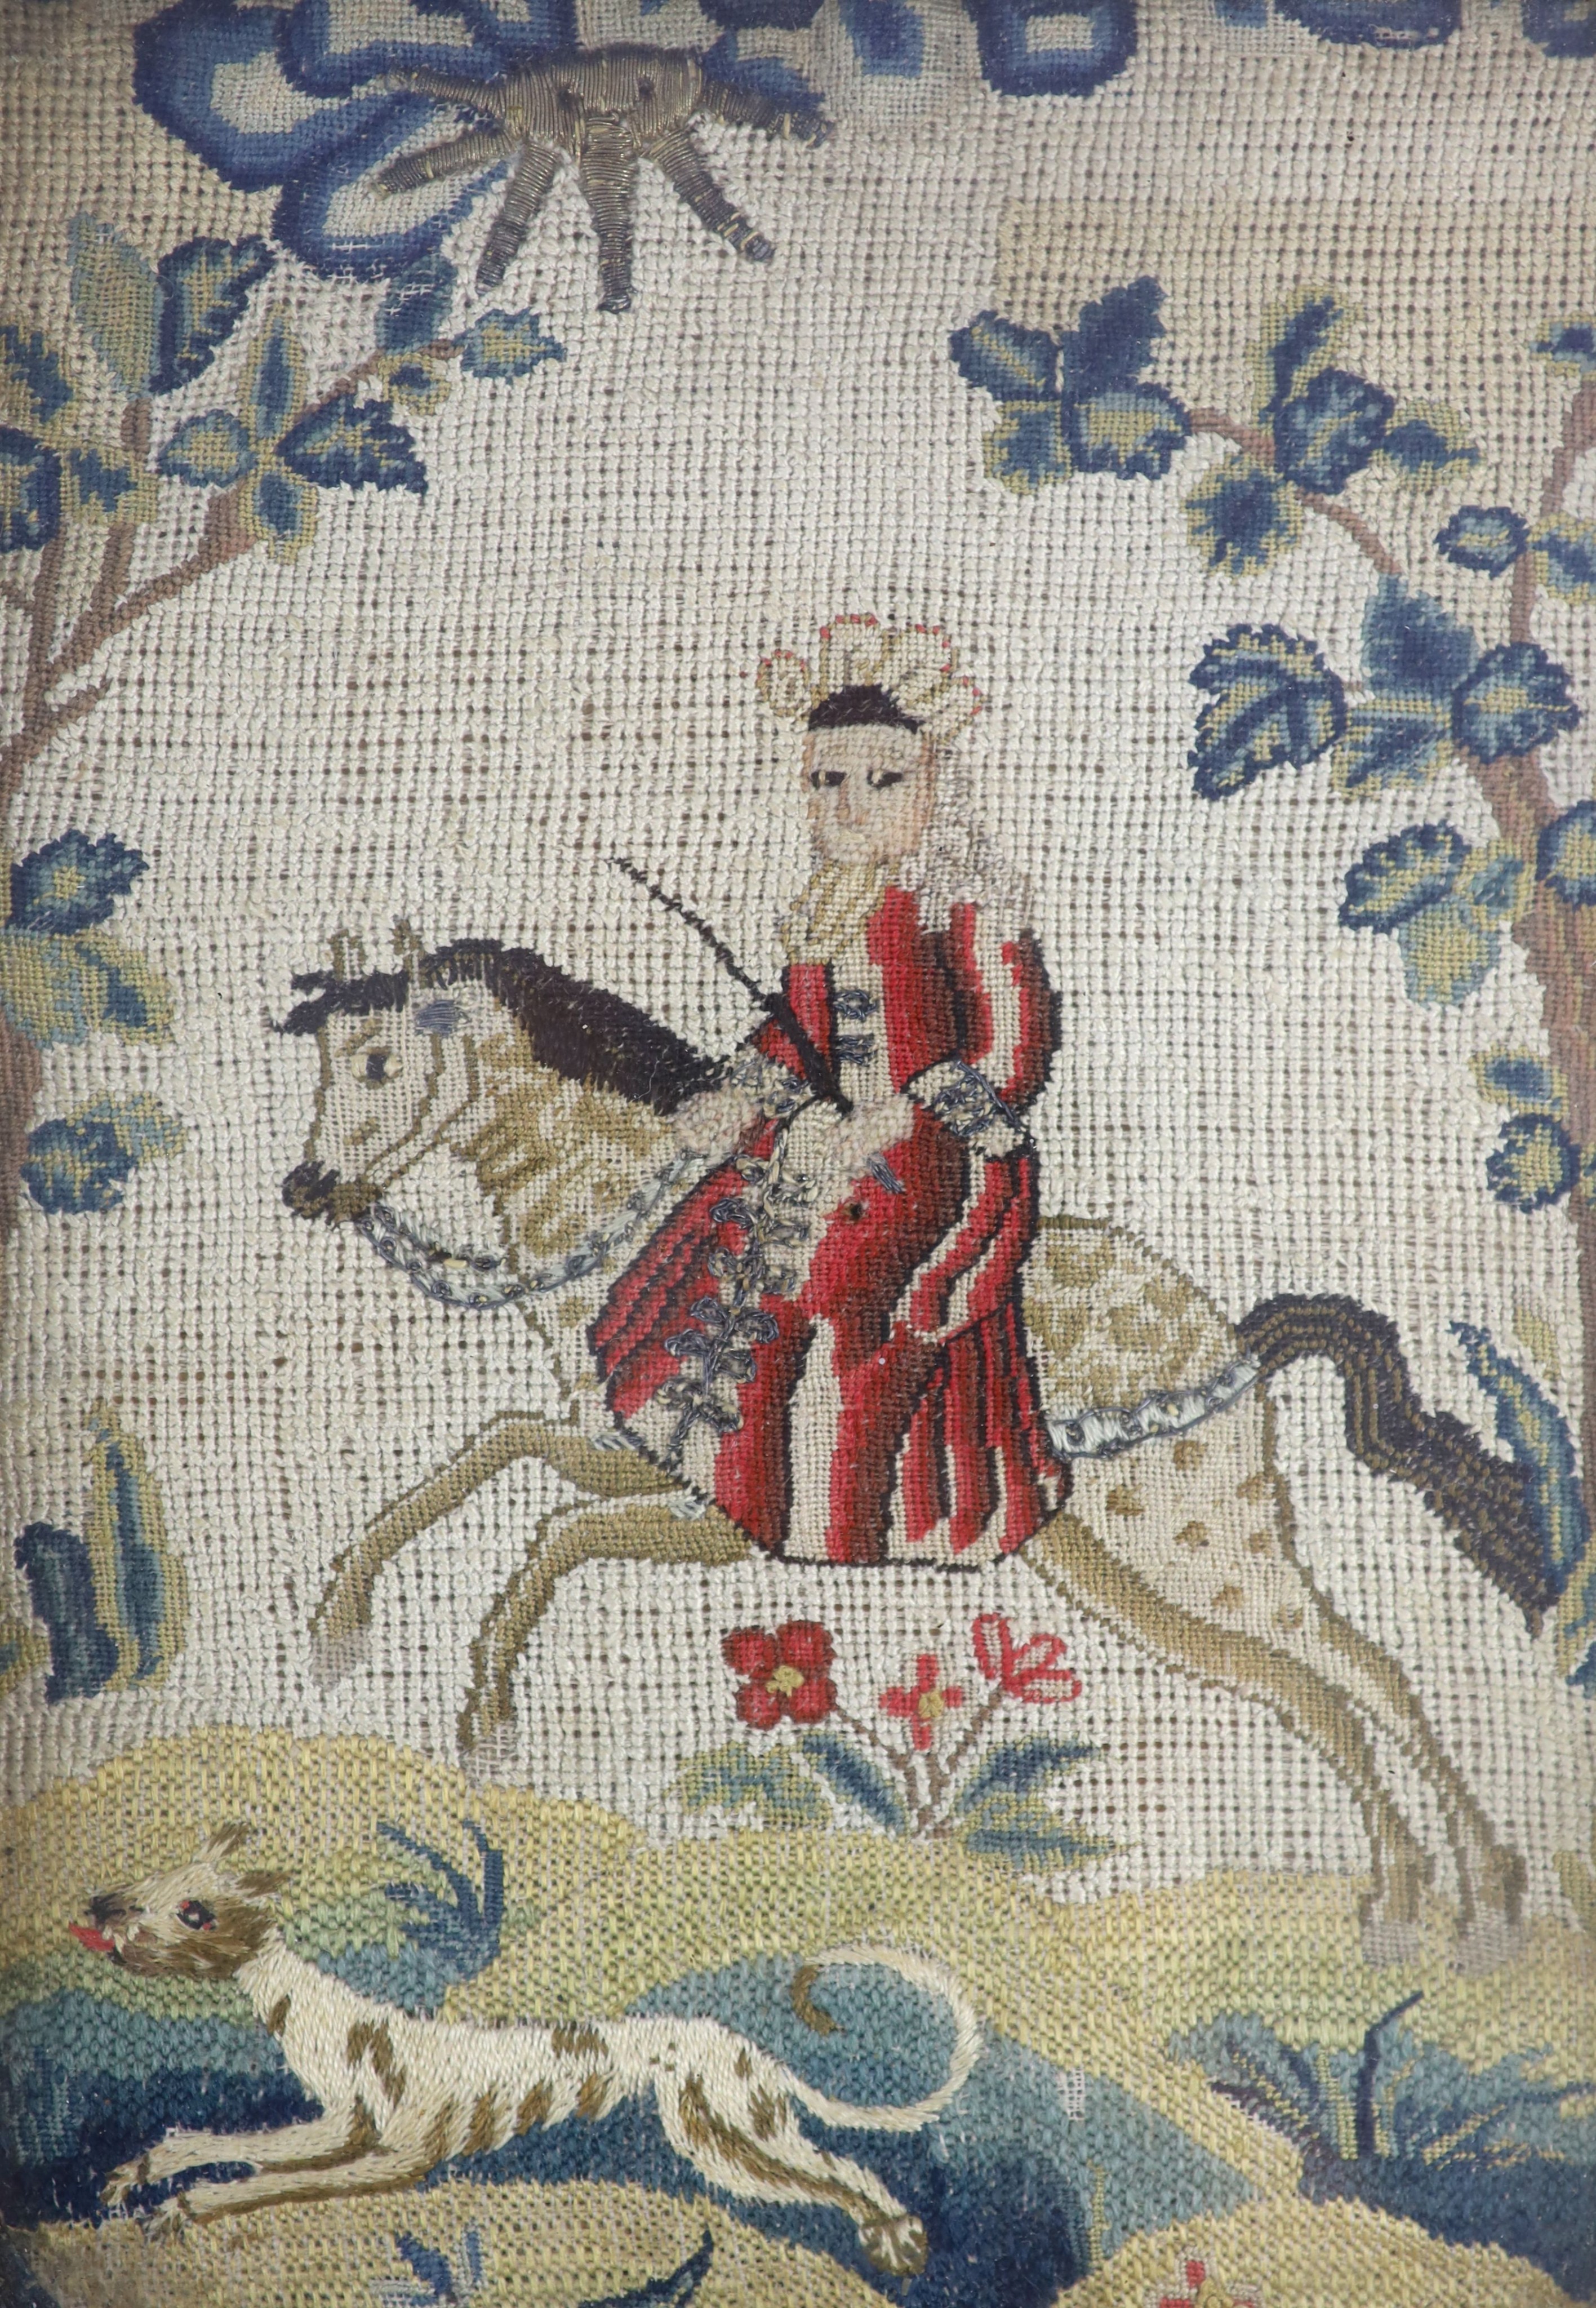 A pair of framed early 18th century needlework panels of a lady and gentleman on horseback with dogs running at their feet 23x16cm excl frame